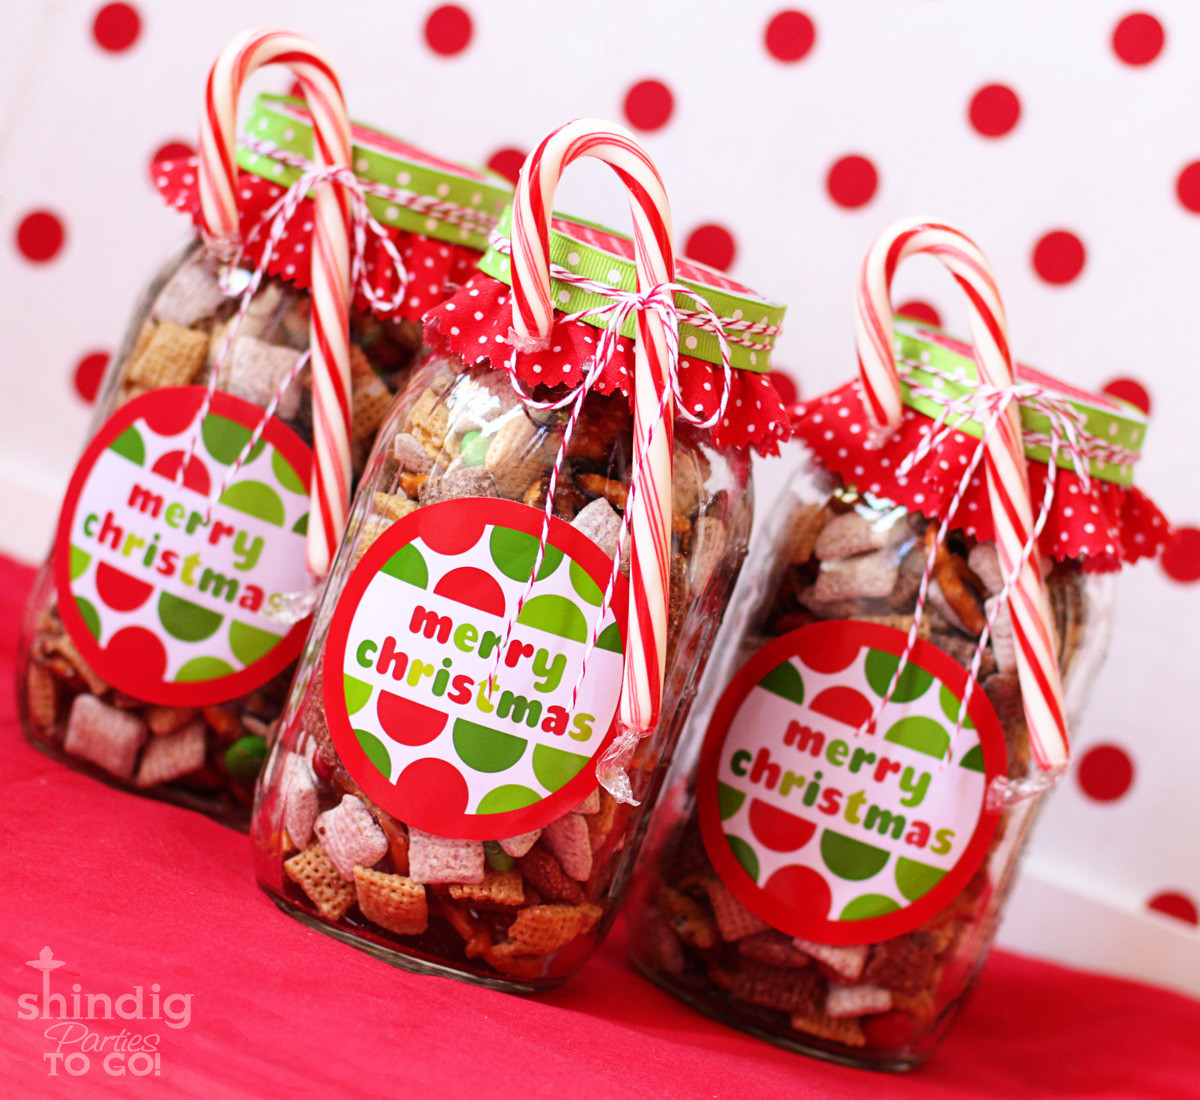 Candy Gifts For Christmas
 How To Make Handmade Chex Mix Holiday Gifts & Bonus Free